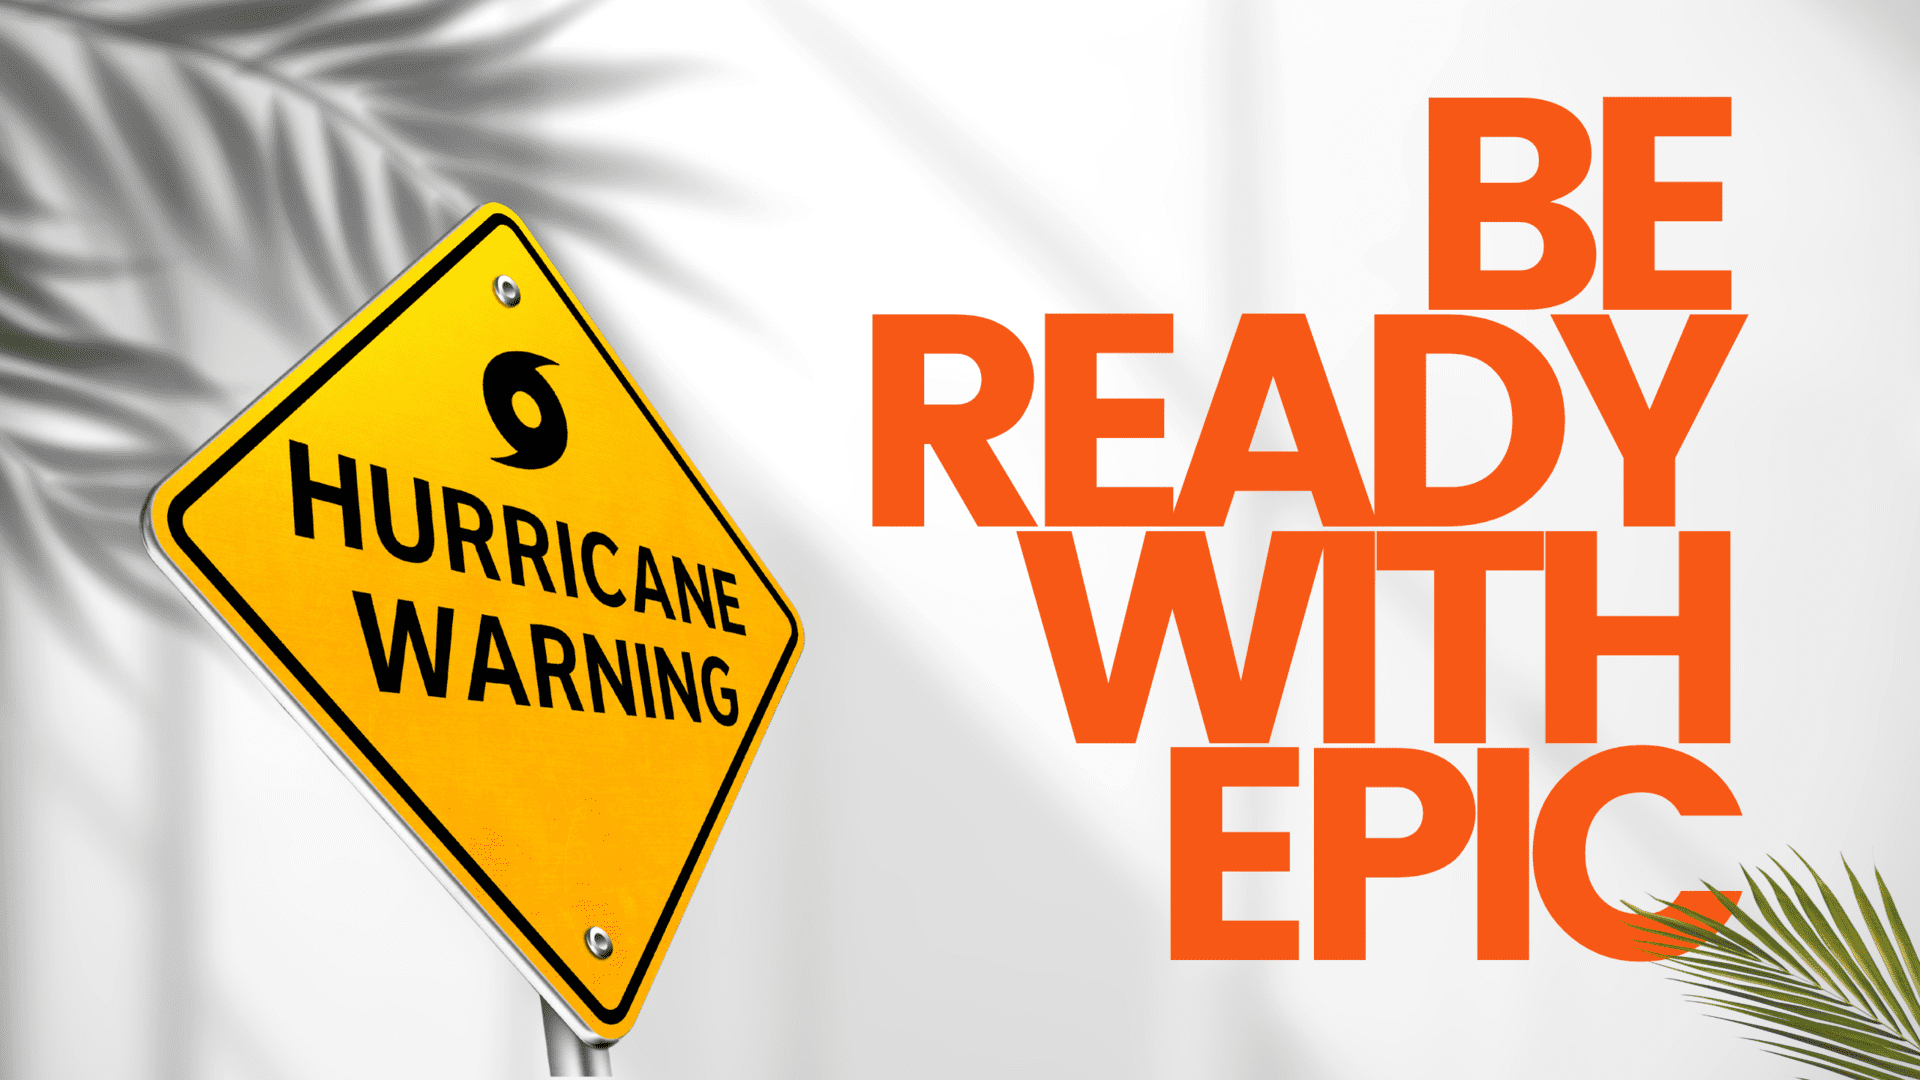 Hurricane Warning. Be ready with EPIC